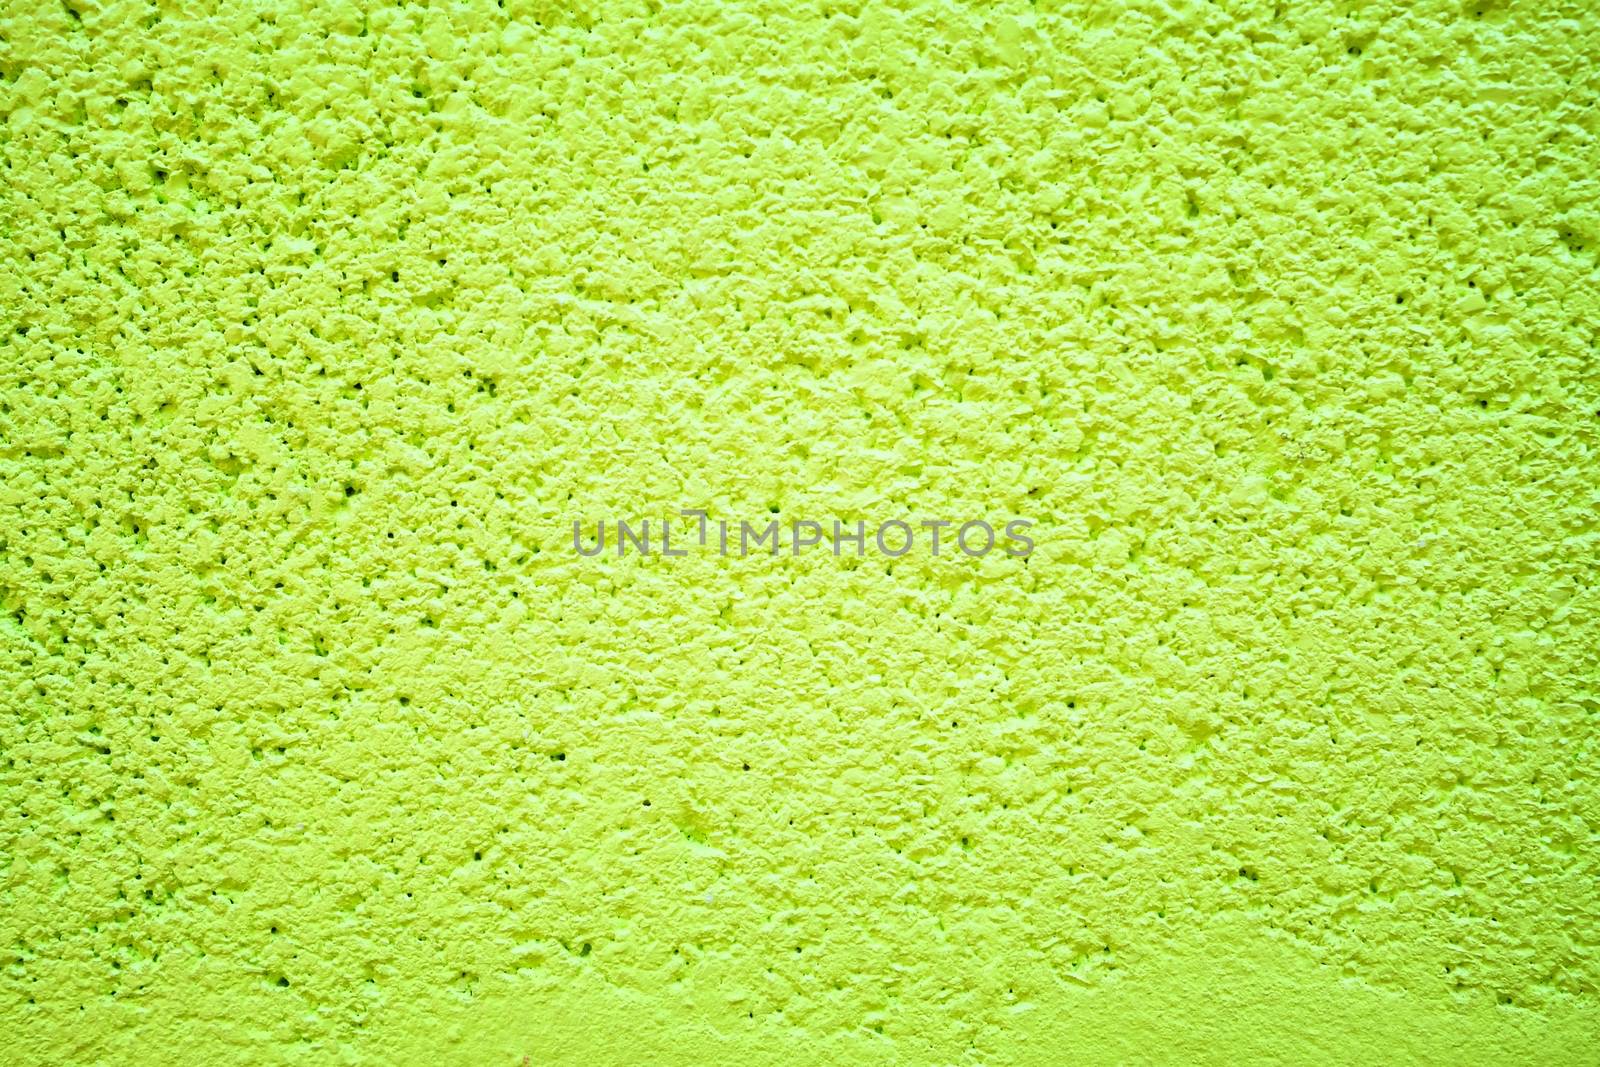 Green Painting on Concrete Wall Texture Background.